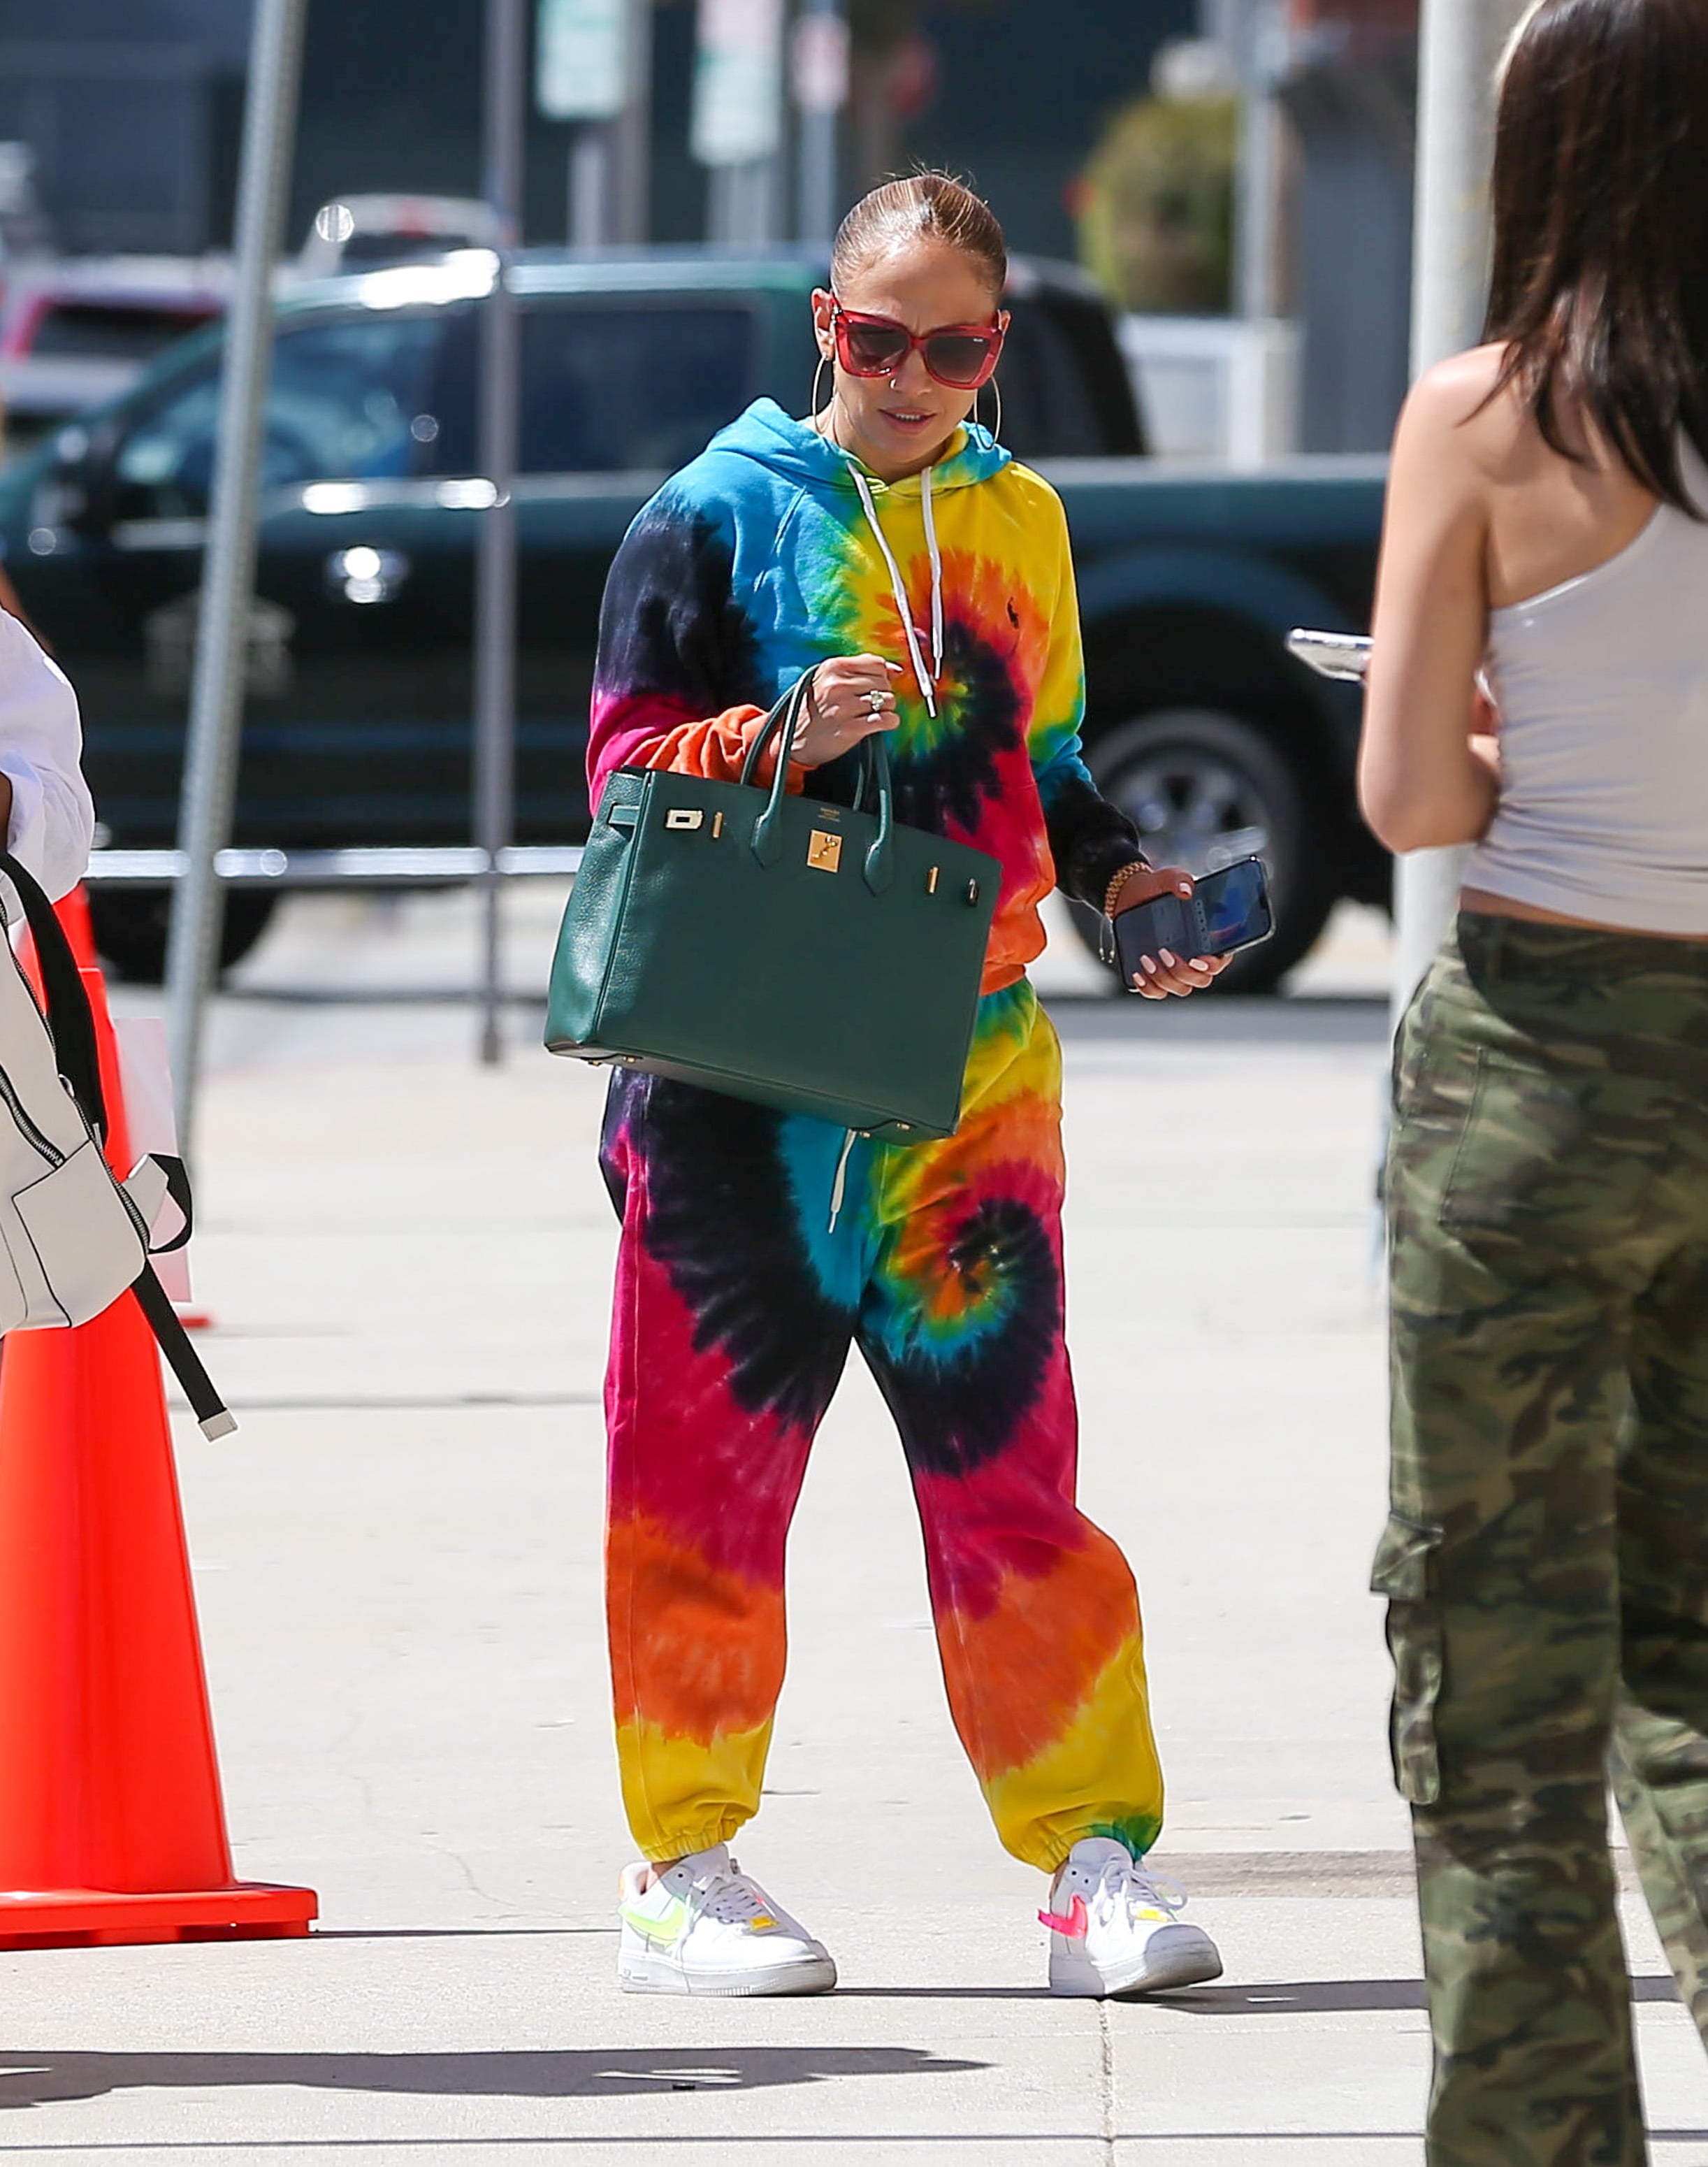 Jennifer Lopez's Cat Sweatshirt and Ugg Boots Look for Less - The